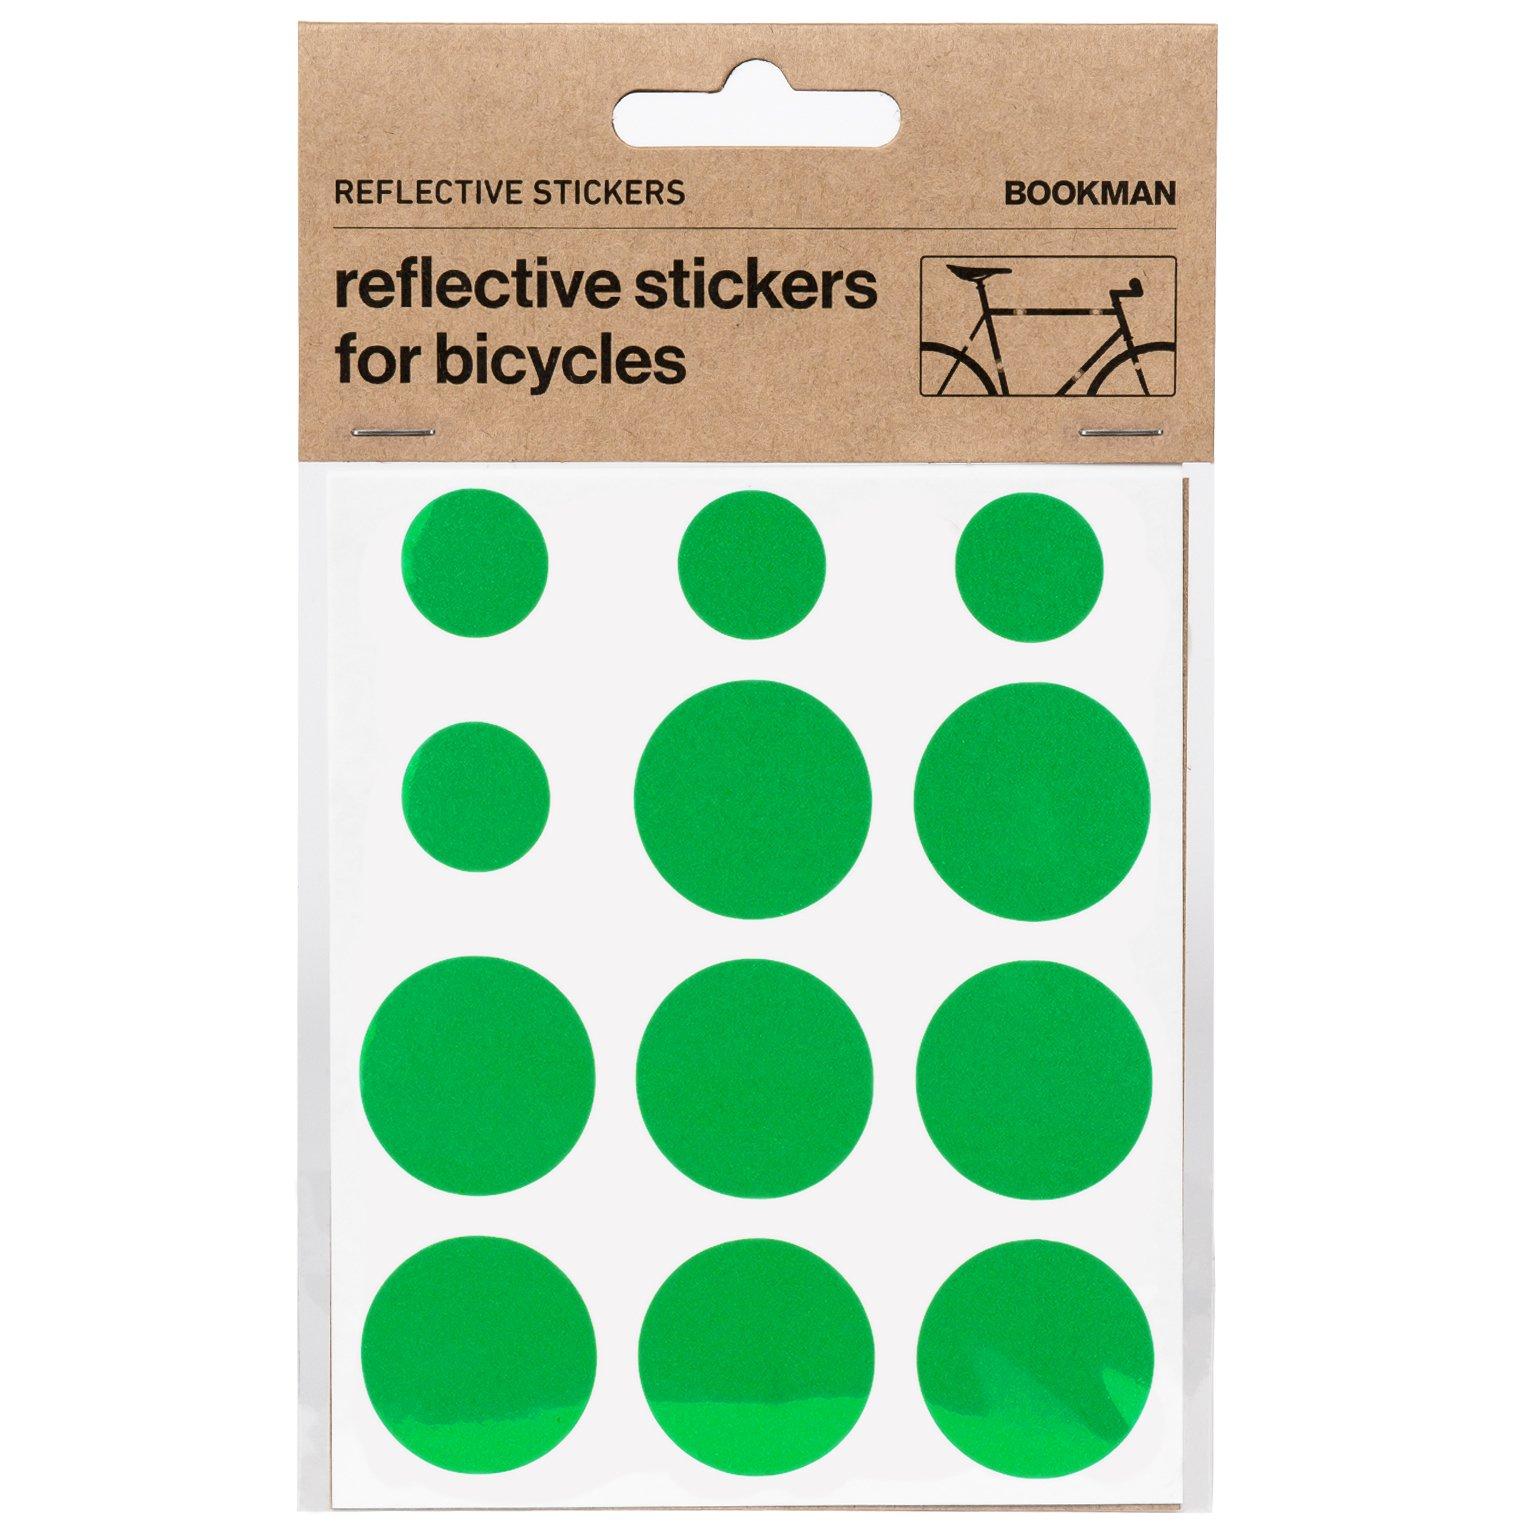 Bookman Reflective Stickers - Green